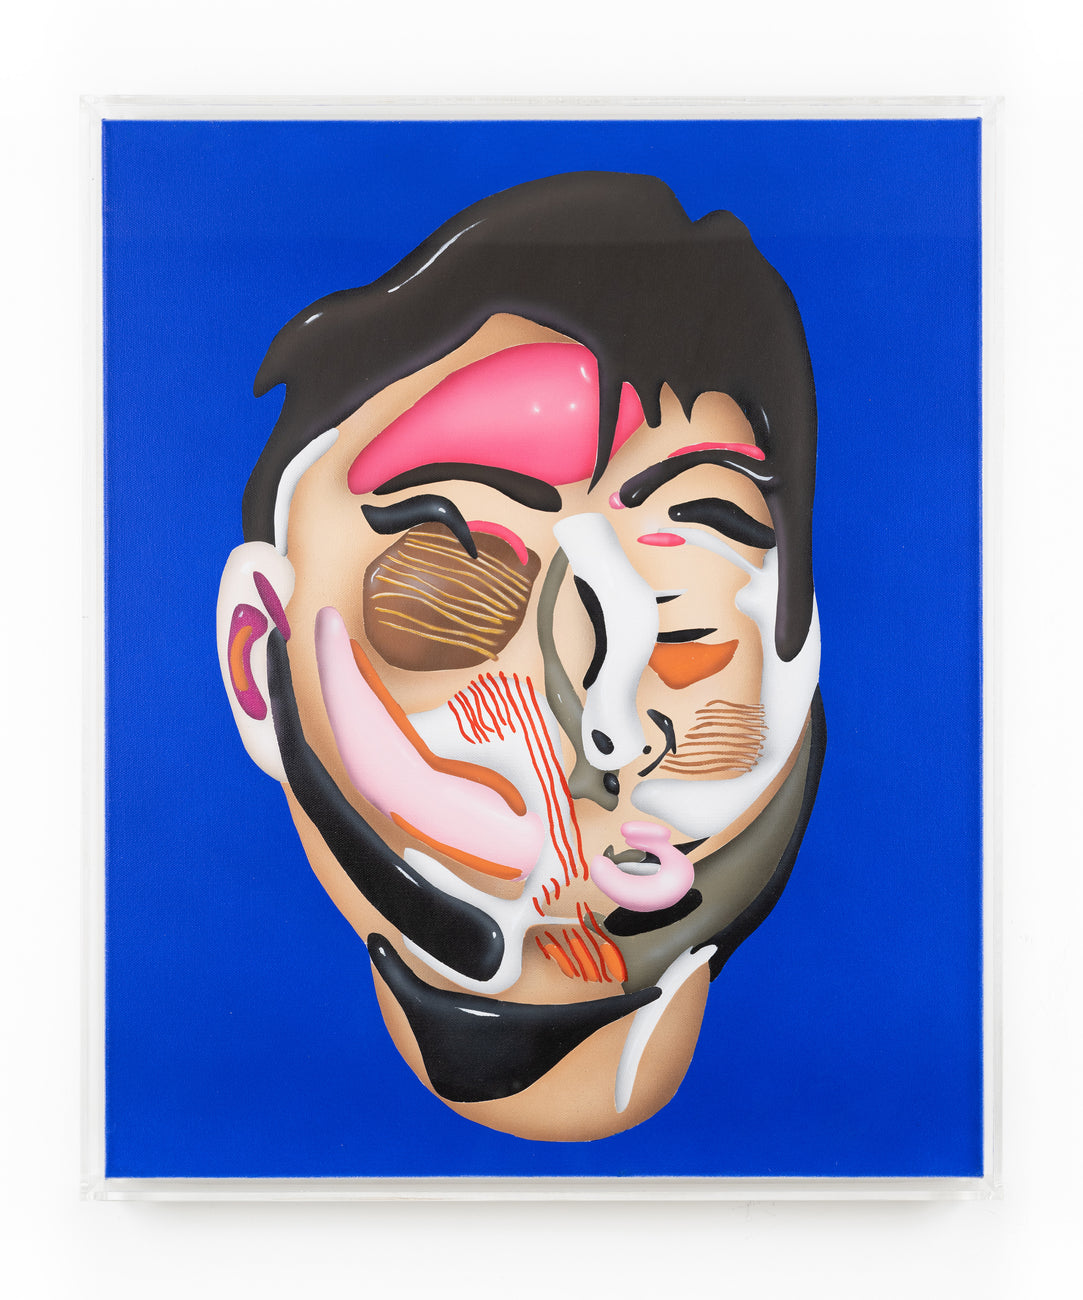 Head Study From The Lobster Land Museum (Blue), PHILIP COLBERT, 2019Oil and acrylic on canvas60.0 × 50.0 cm